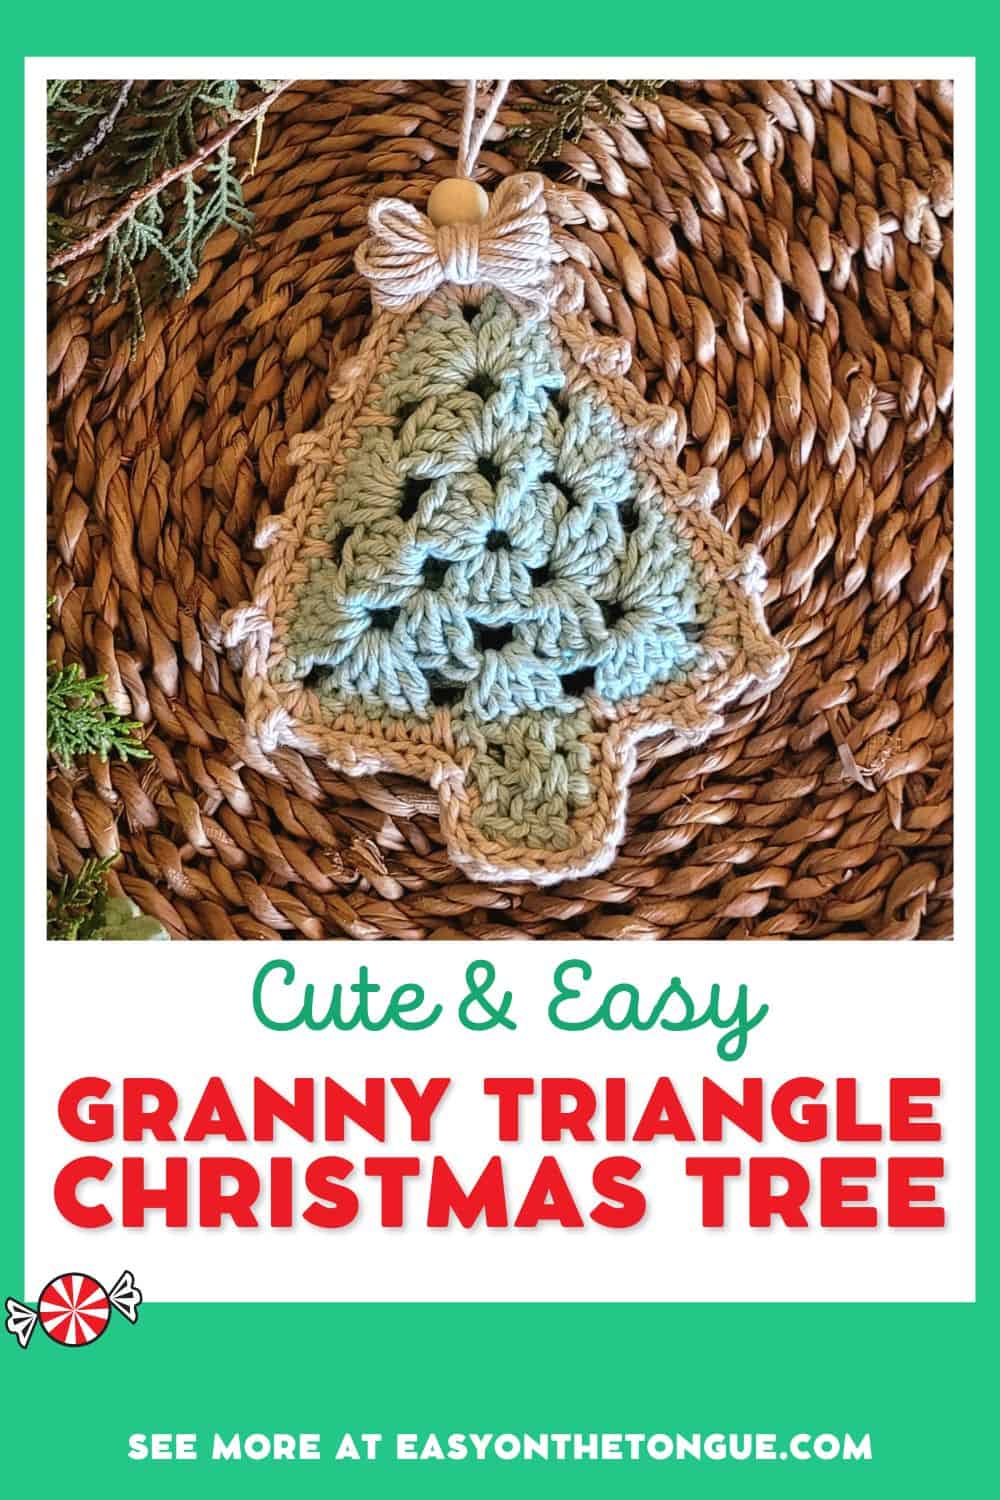 Quick crochet pattern for a triangle granny Christmas tree ornament